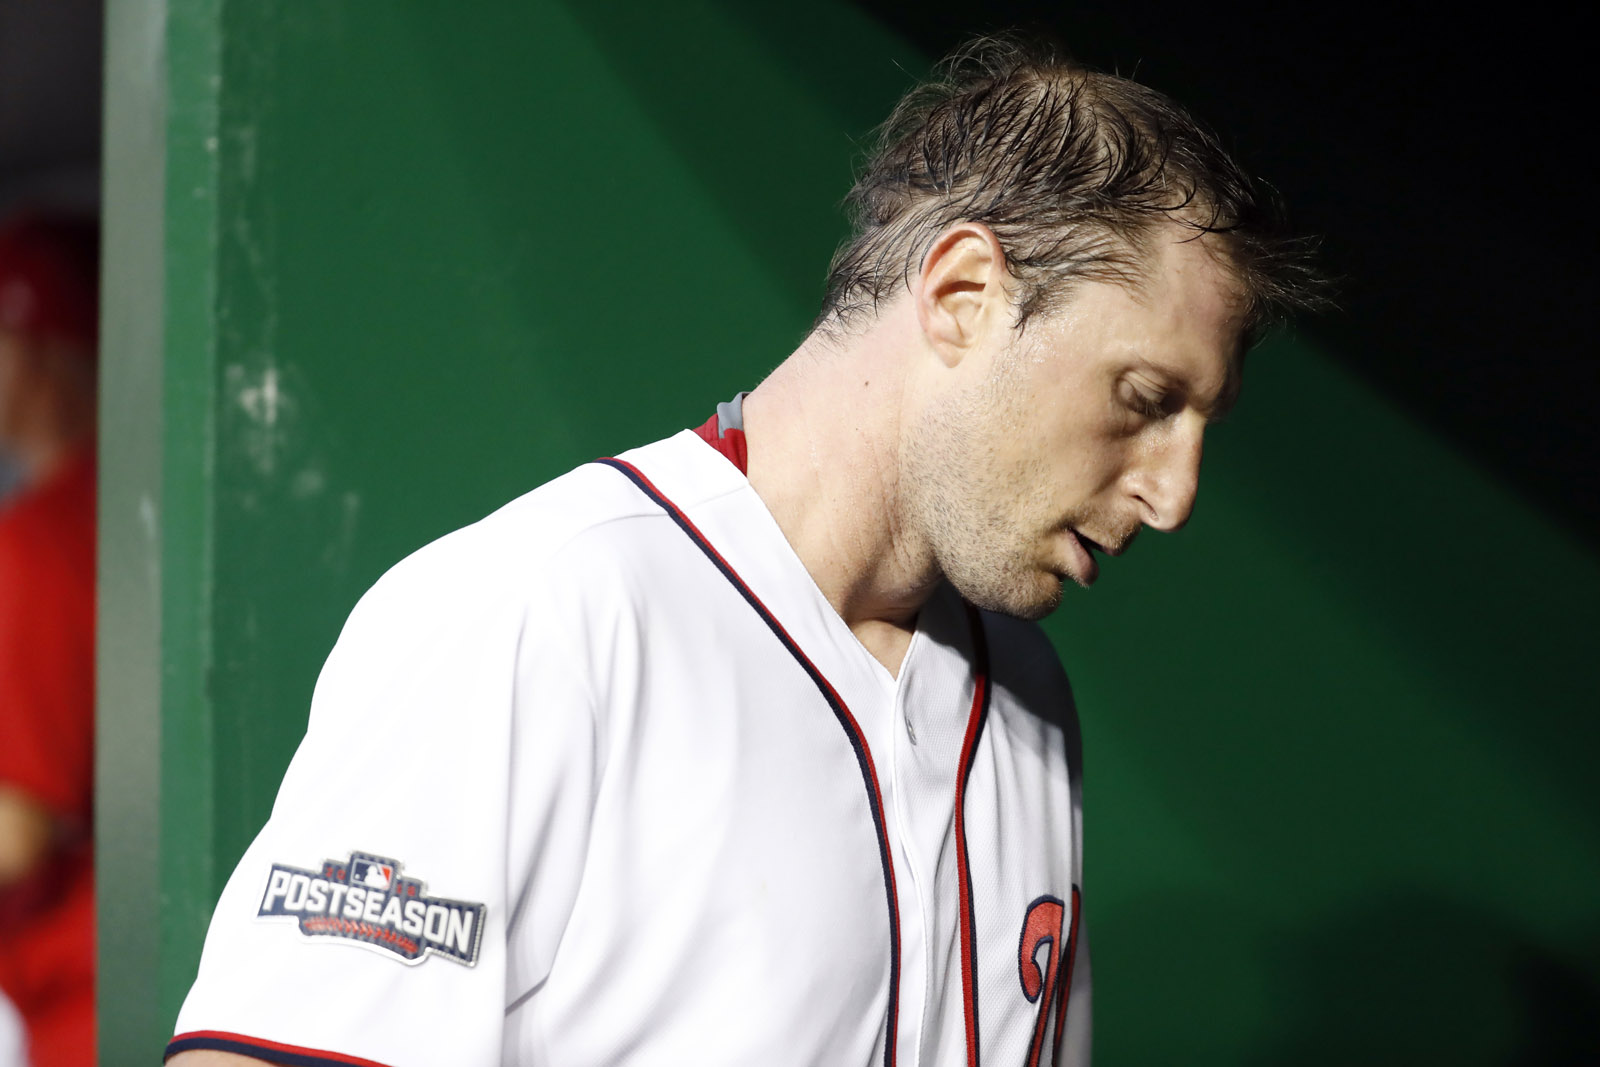 Washington Nationals starting pitcher Max Scherzer (31) walks out of the dugout after pitching the third inning of Game 1 of baseball's National League Division Series against the Los Angeles Dodgers, at Nationals Park, Friday, Oct. 7, 2016, in Washington. (AP Photo/Alex Brandon)